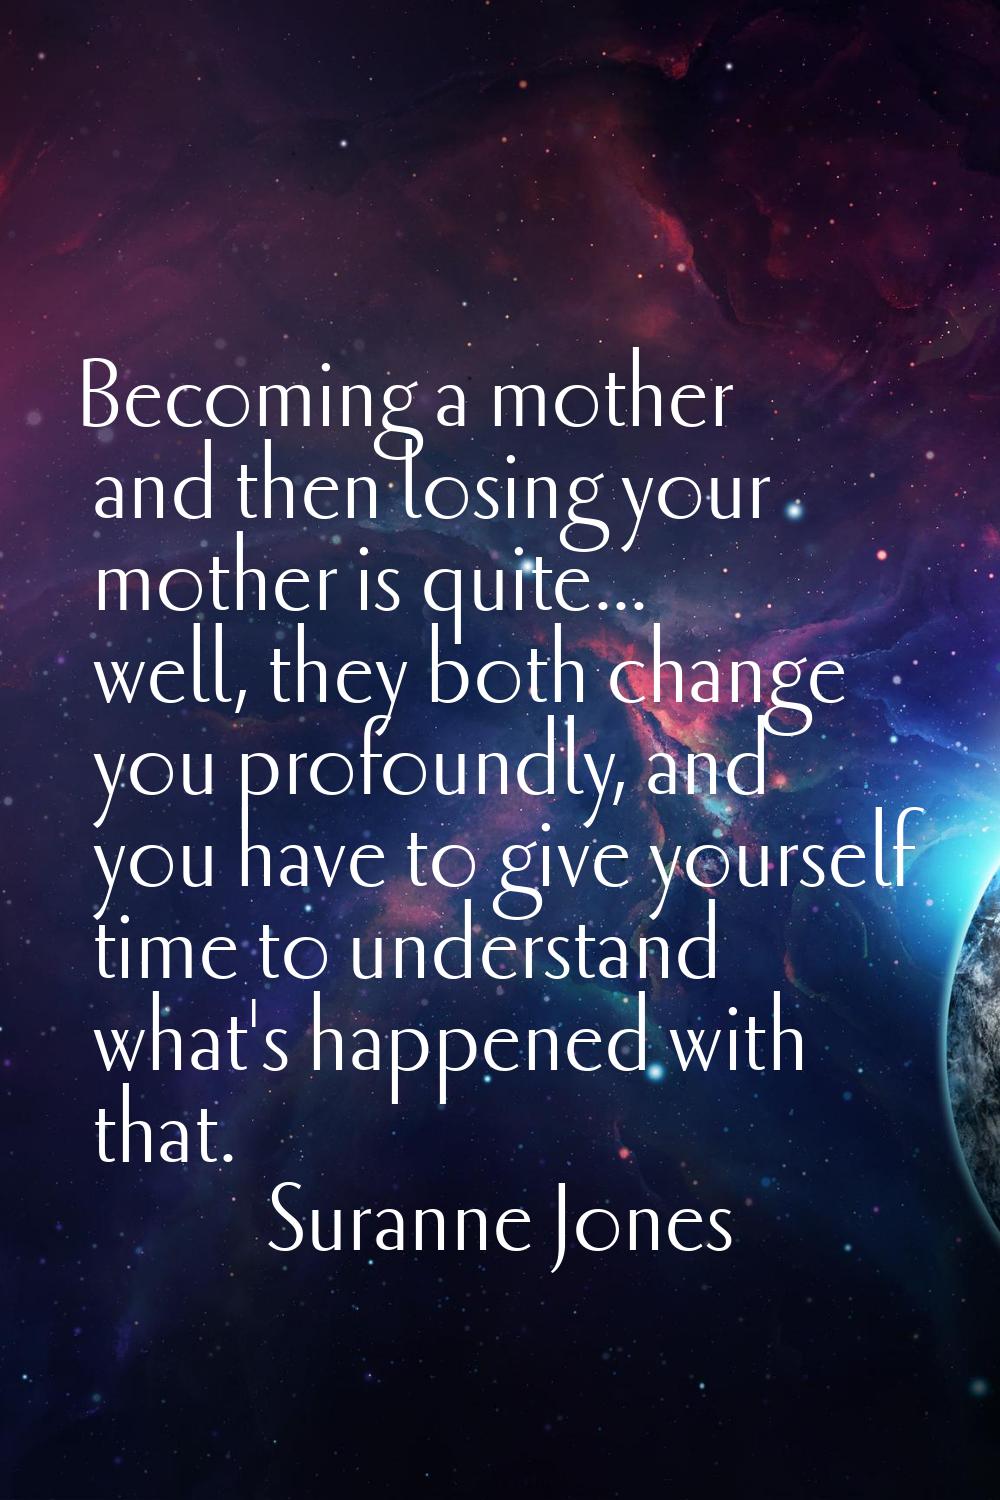 Becoming a mother and then losing your mother is quite... well, they both change you profoundly, an